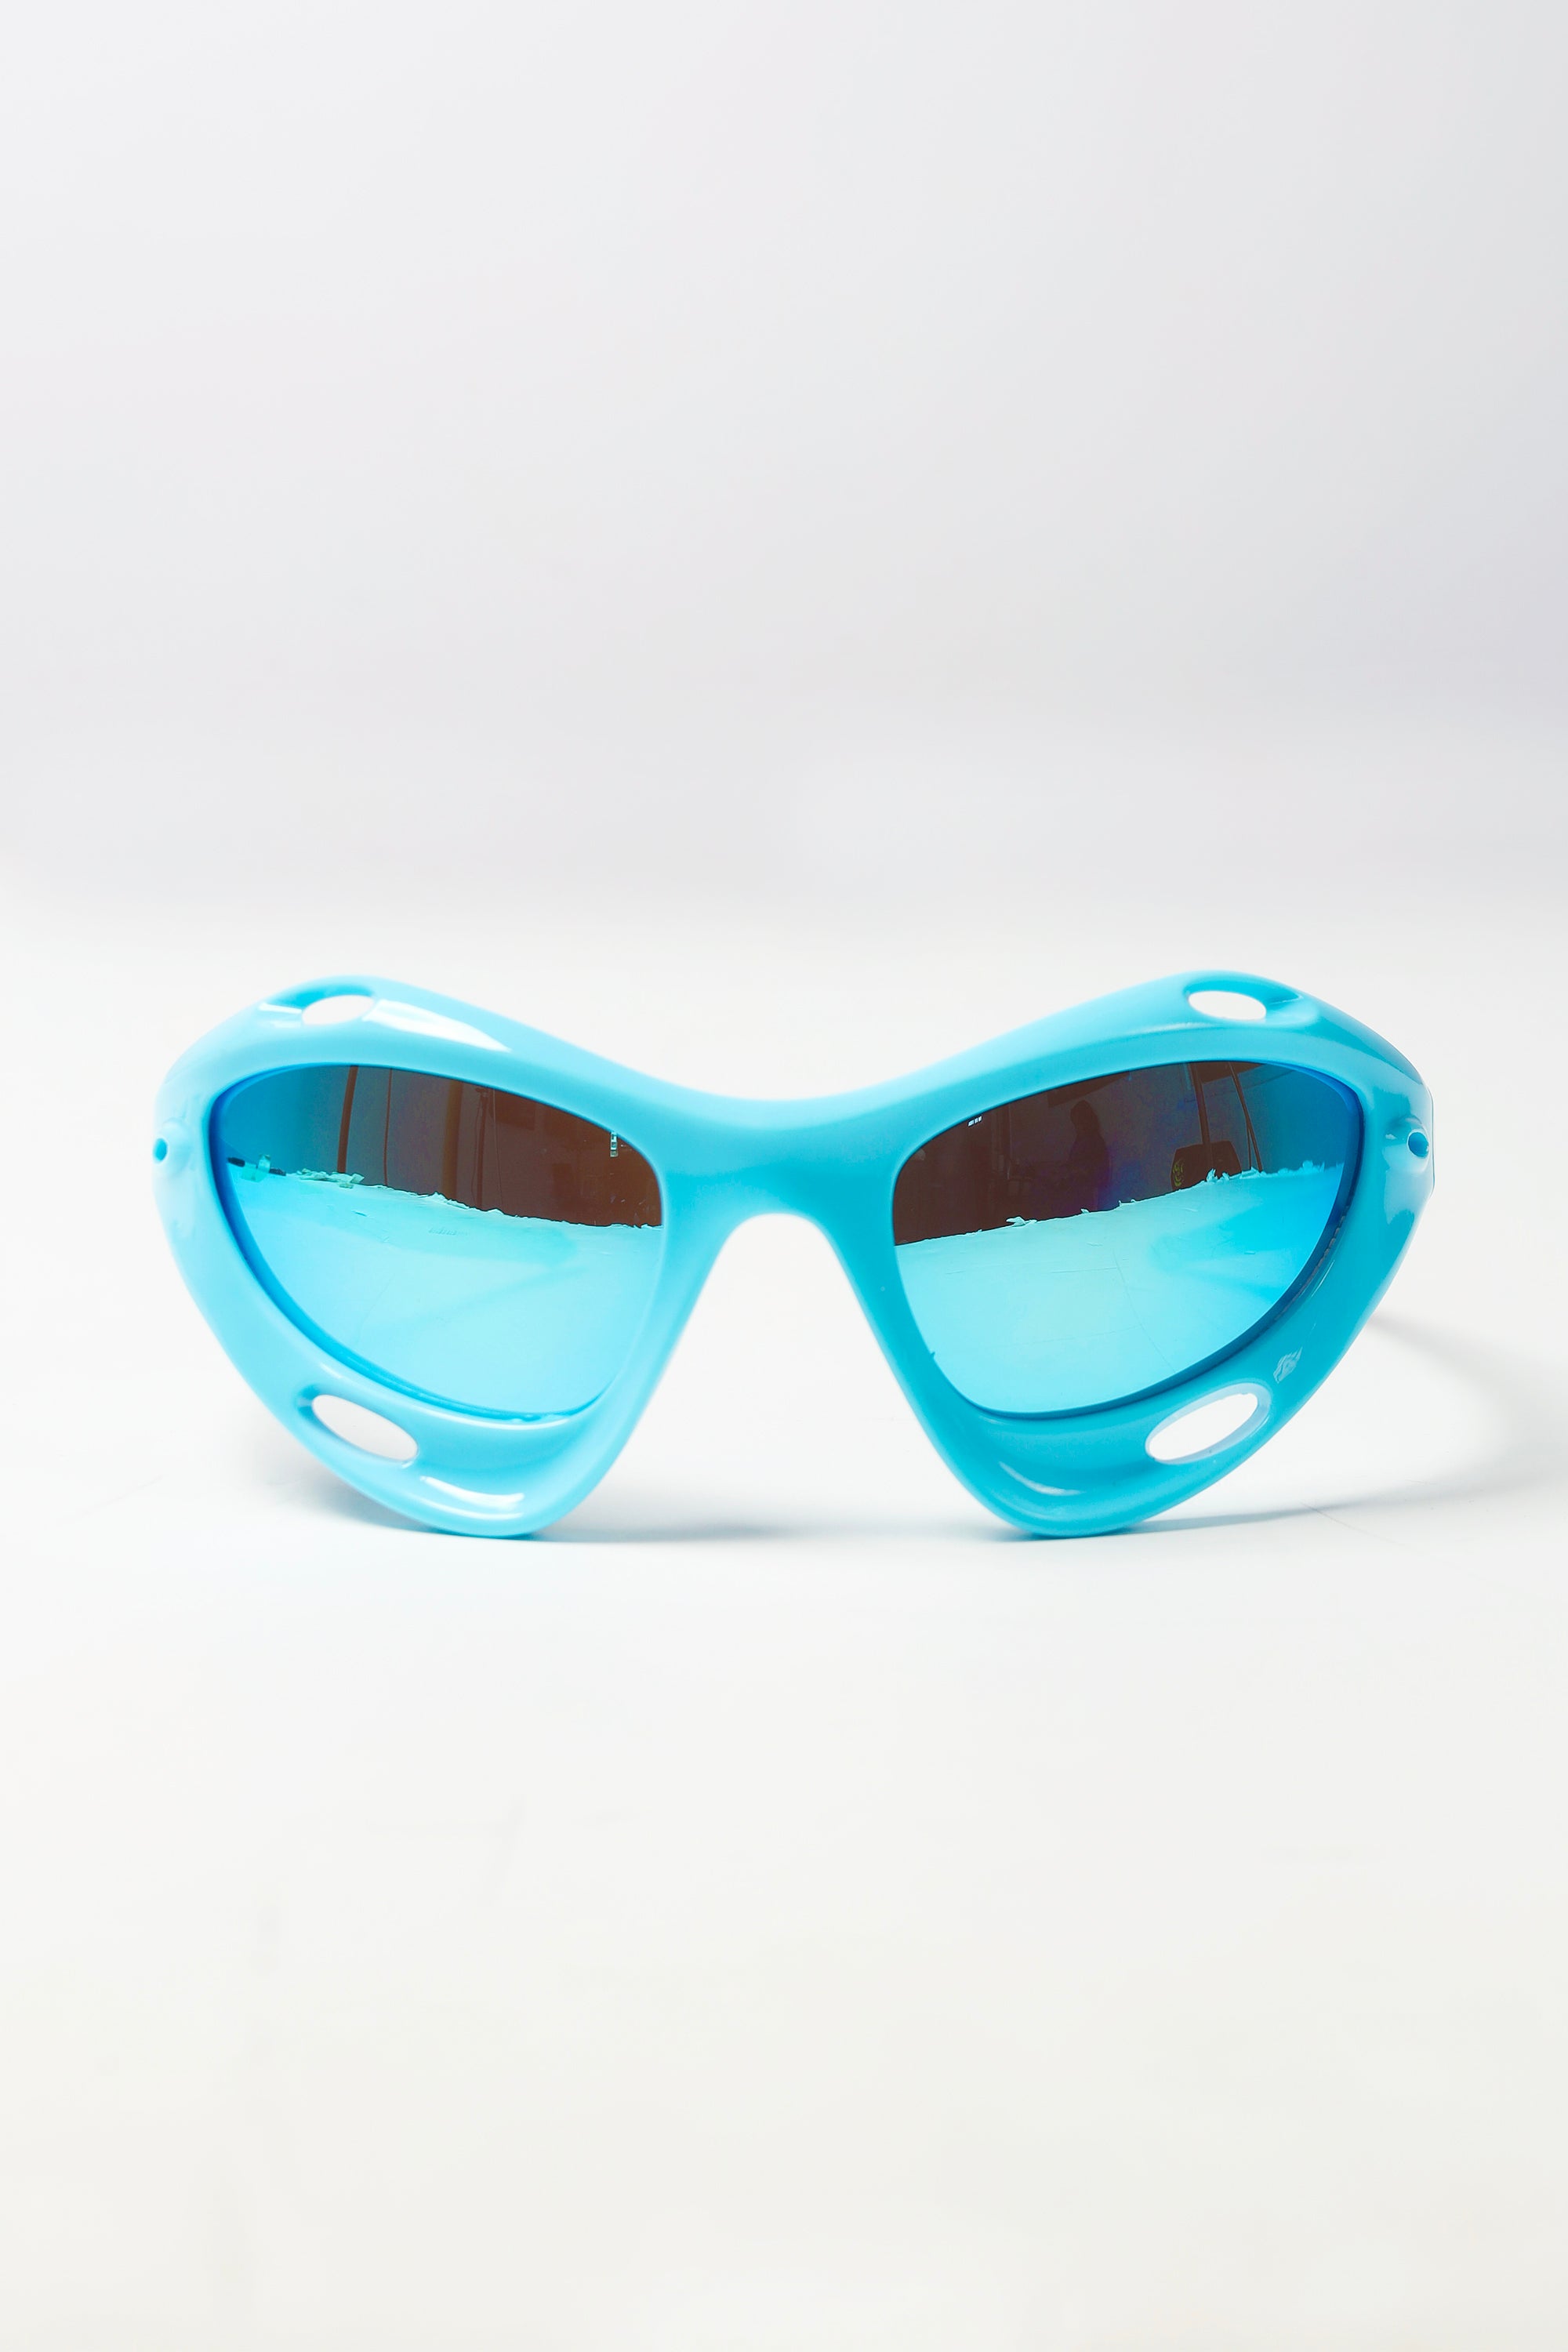 TURQUOISE FRAME 18